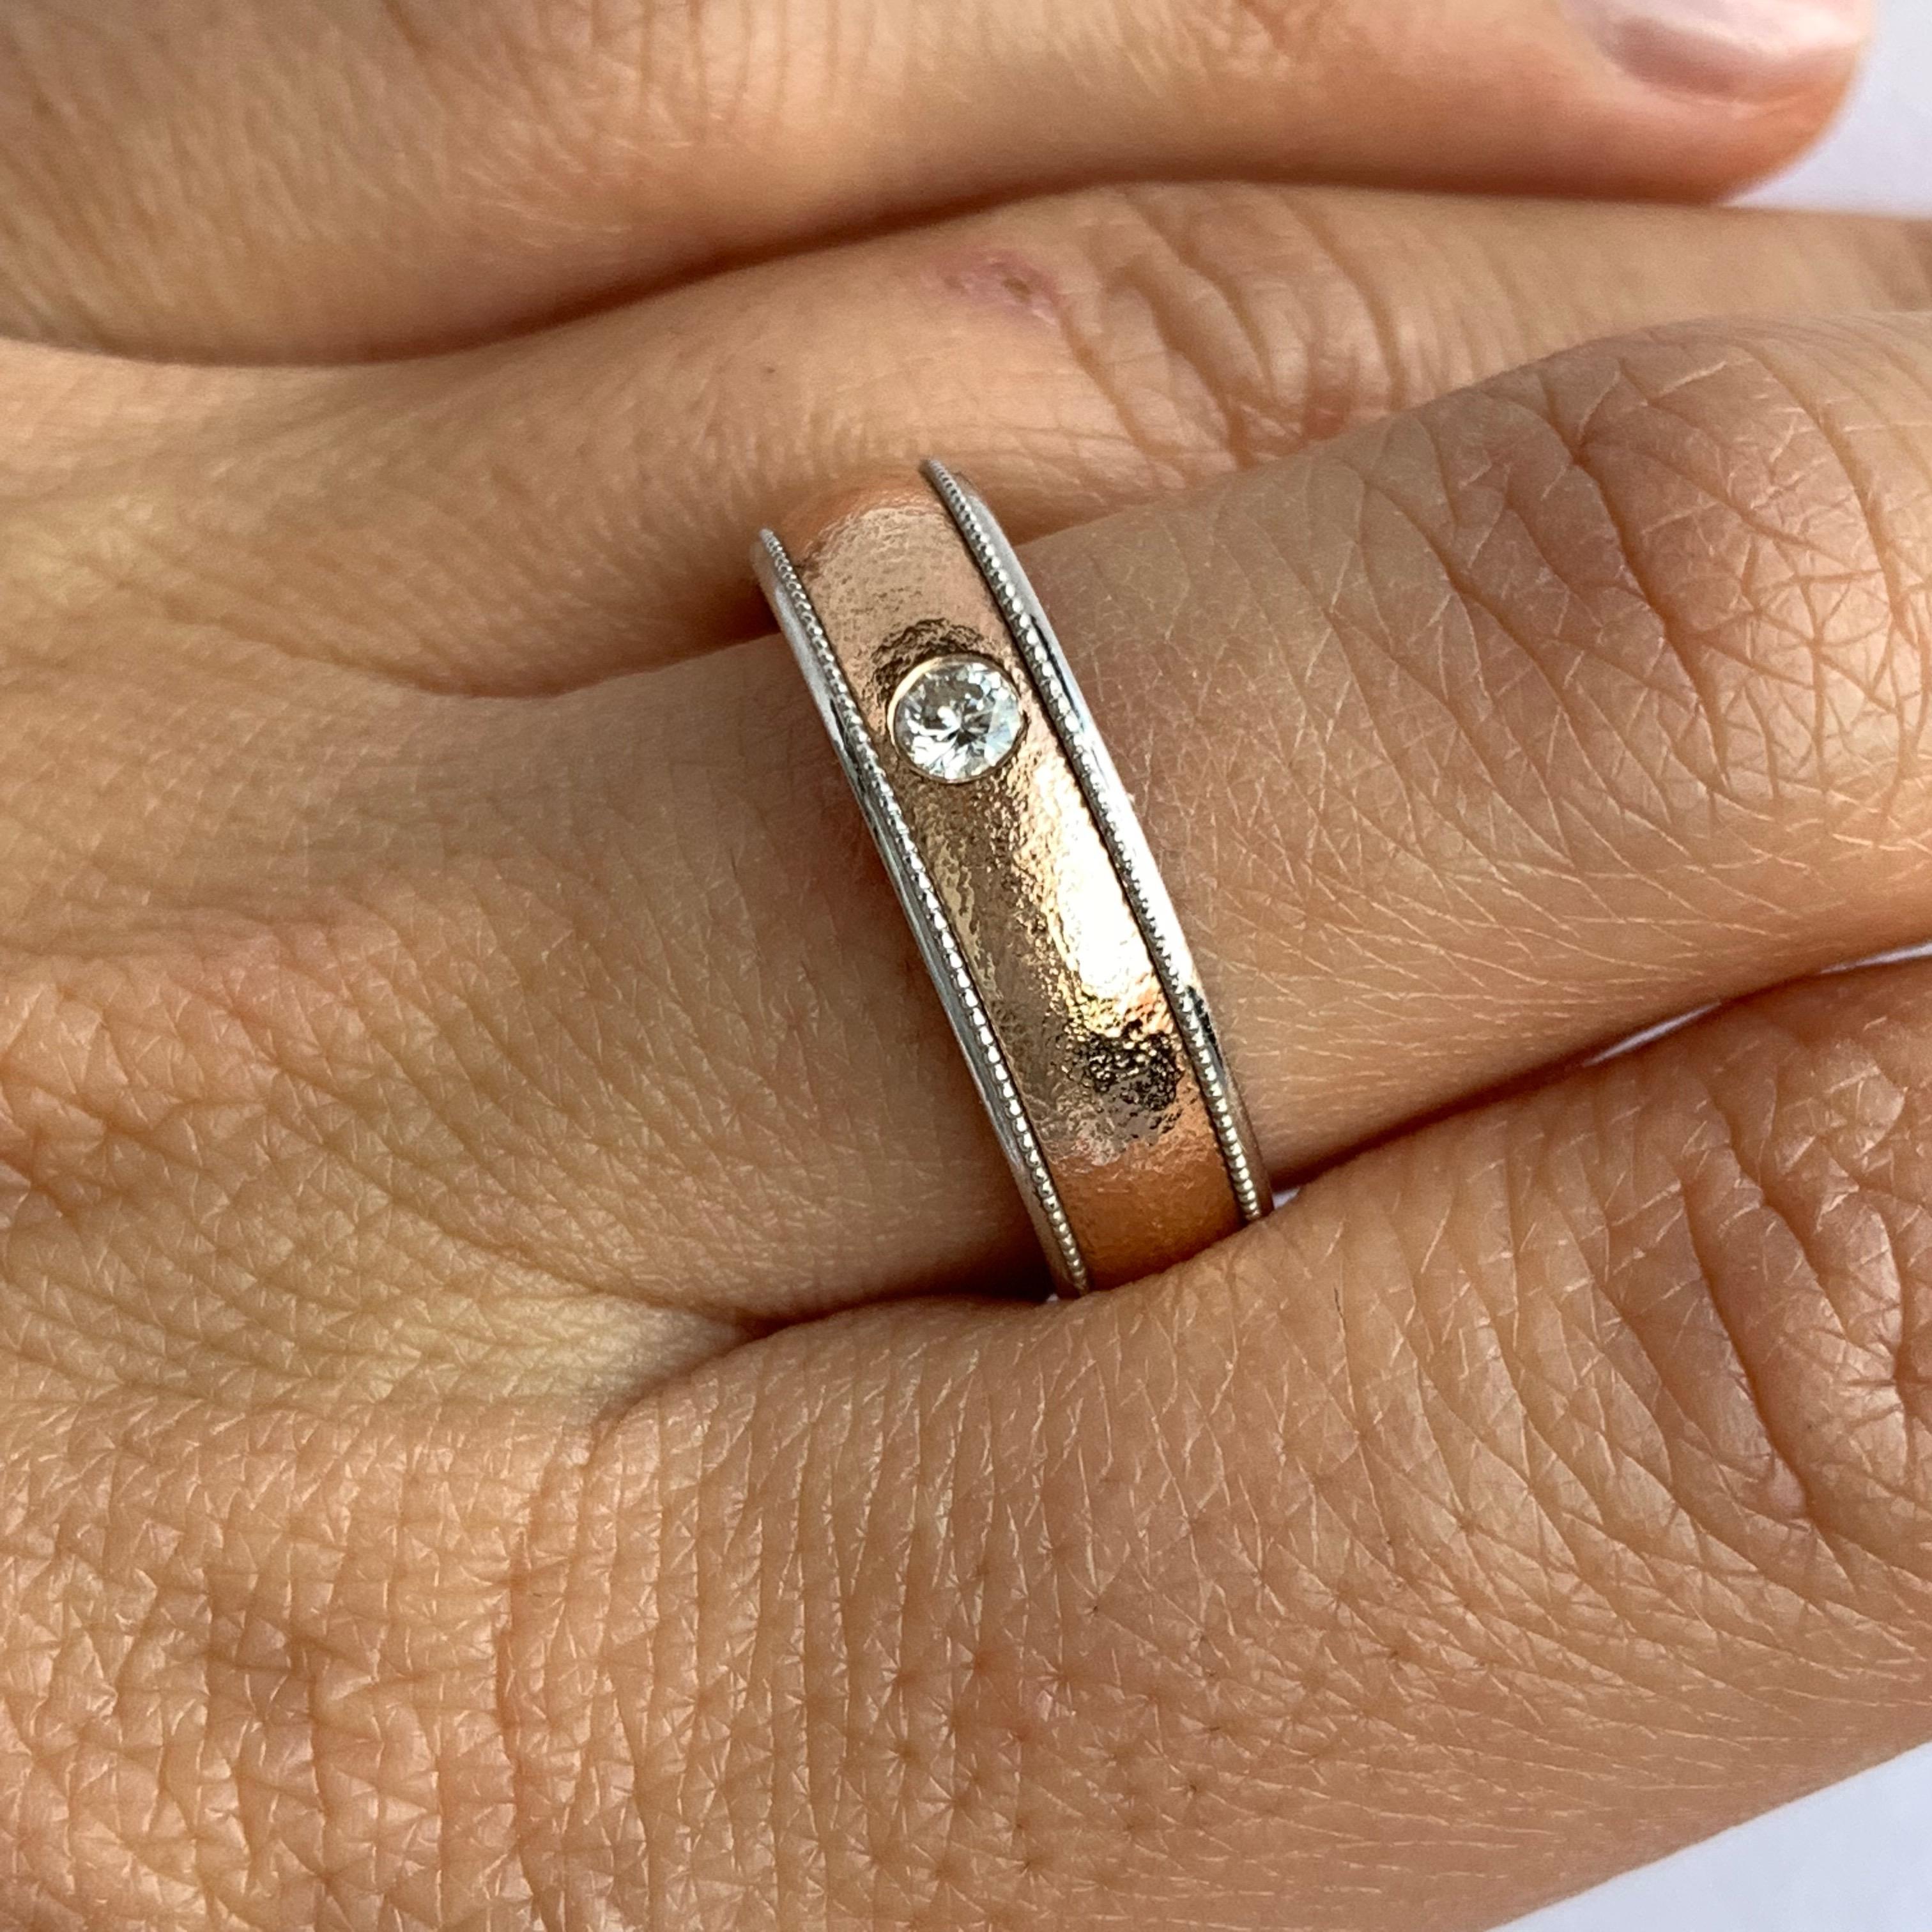 The perfect style for men or women!

Material: 14k Two Tone
Center Stone Details: 0.10 Carat Round White Diamond-Clarity: SI / Color: H-I
Ring Size: Size 8.5. This ring cannot be sized but can be remade in any size!

Fine one-of-a-kind craftsmanship